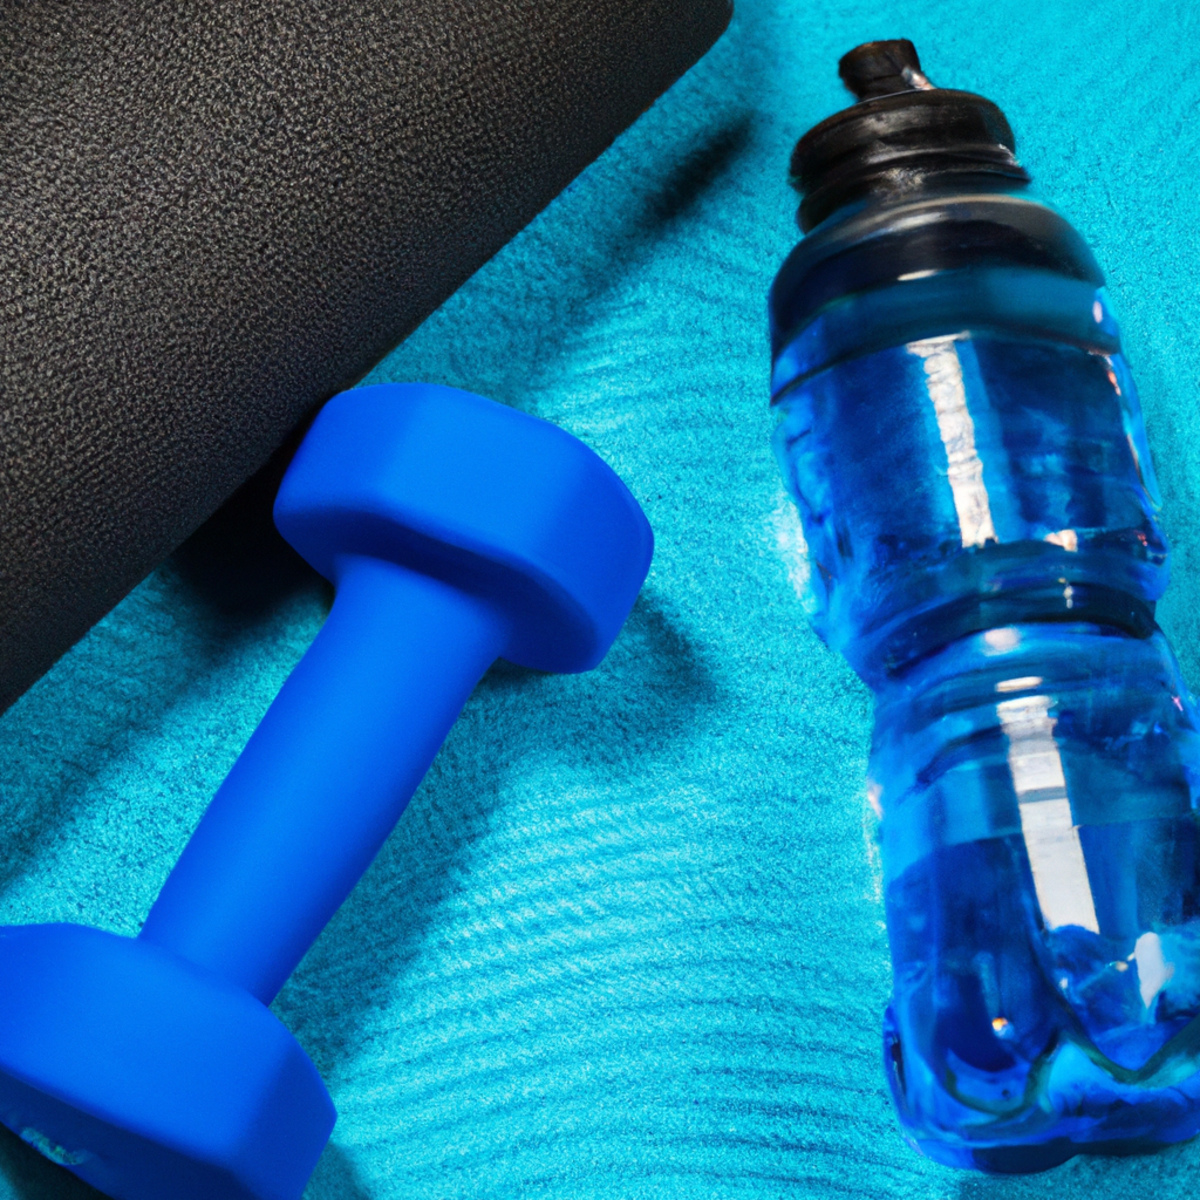 The photo captures a set of dumbbells resting on a yoga mat, surrounded by a water bottle and a towel. The weights are sleek and shiny, with black rubber grips for easy handling. The mat is a vibrant shade of blue, providing a pop of color against the neutral tones of the weights. The water bottle is clear with a blue cap, indicating the importance of staying hydrated during a workout. The towel is neatly folded, ready to be used for wiping away sweat. The composition of the photo suggests a sense of organization and preparedness, encouraging readers to incorporate weights into their at-home workout routine.